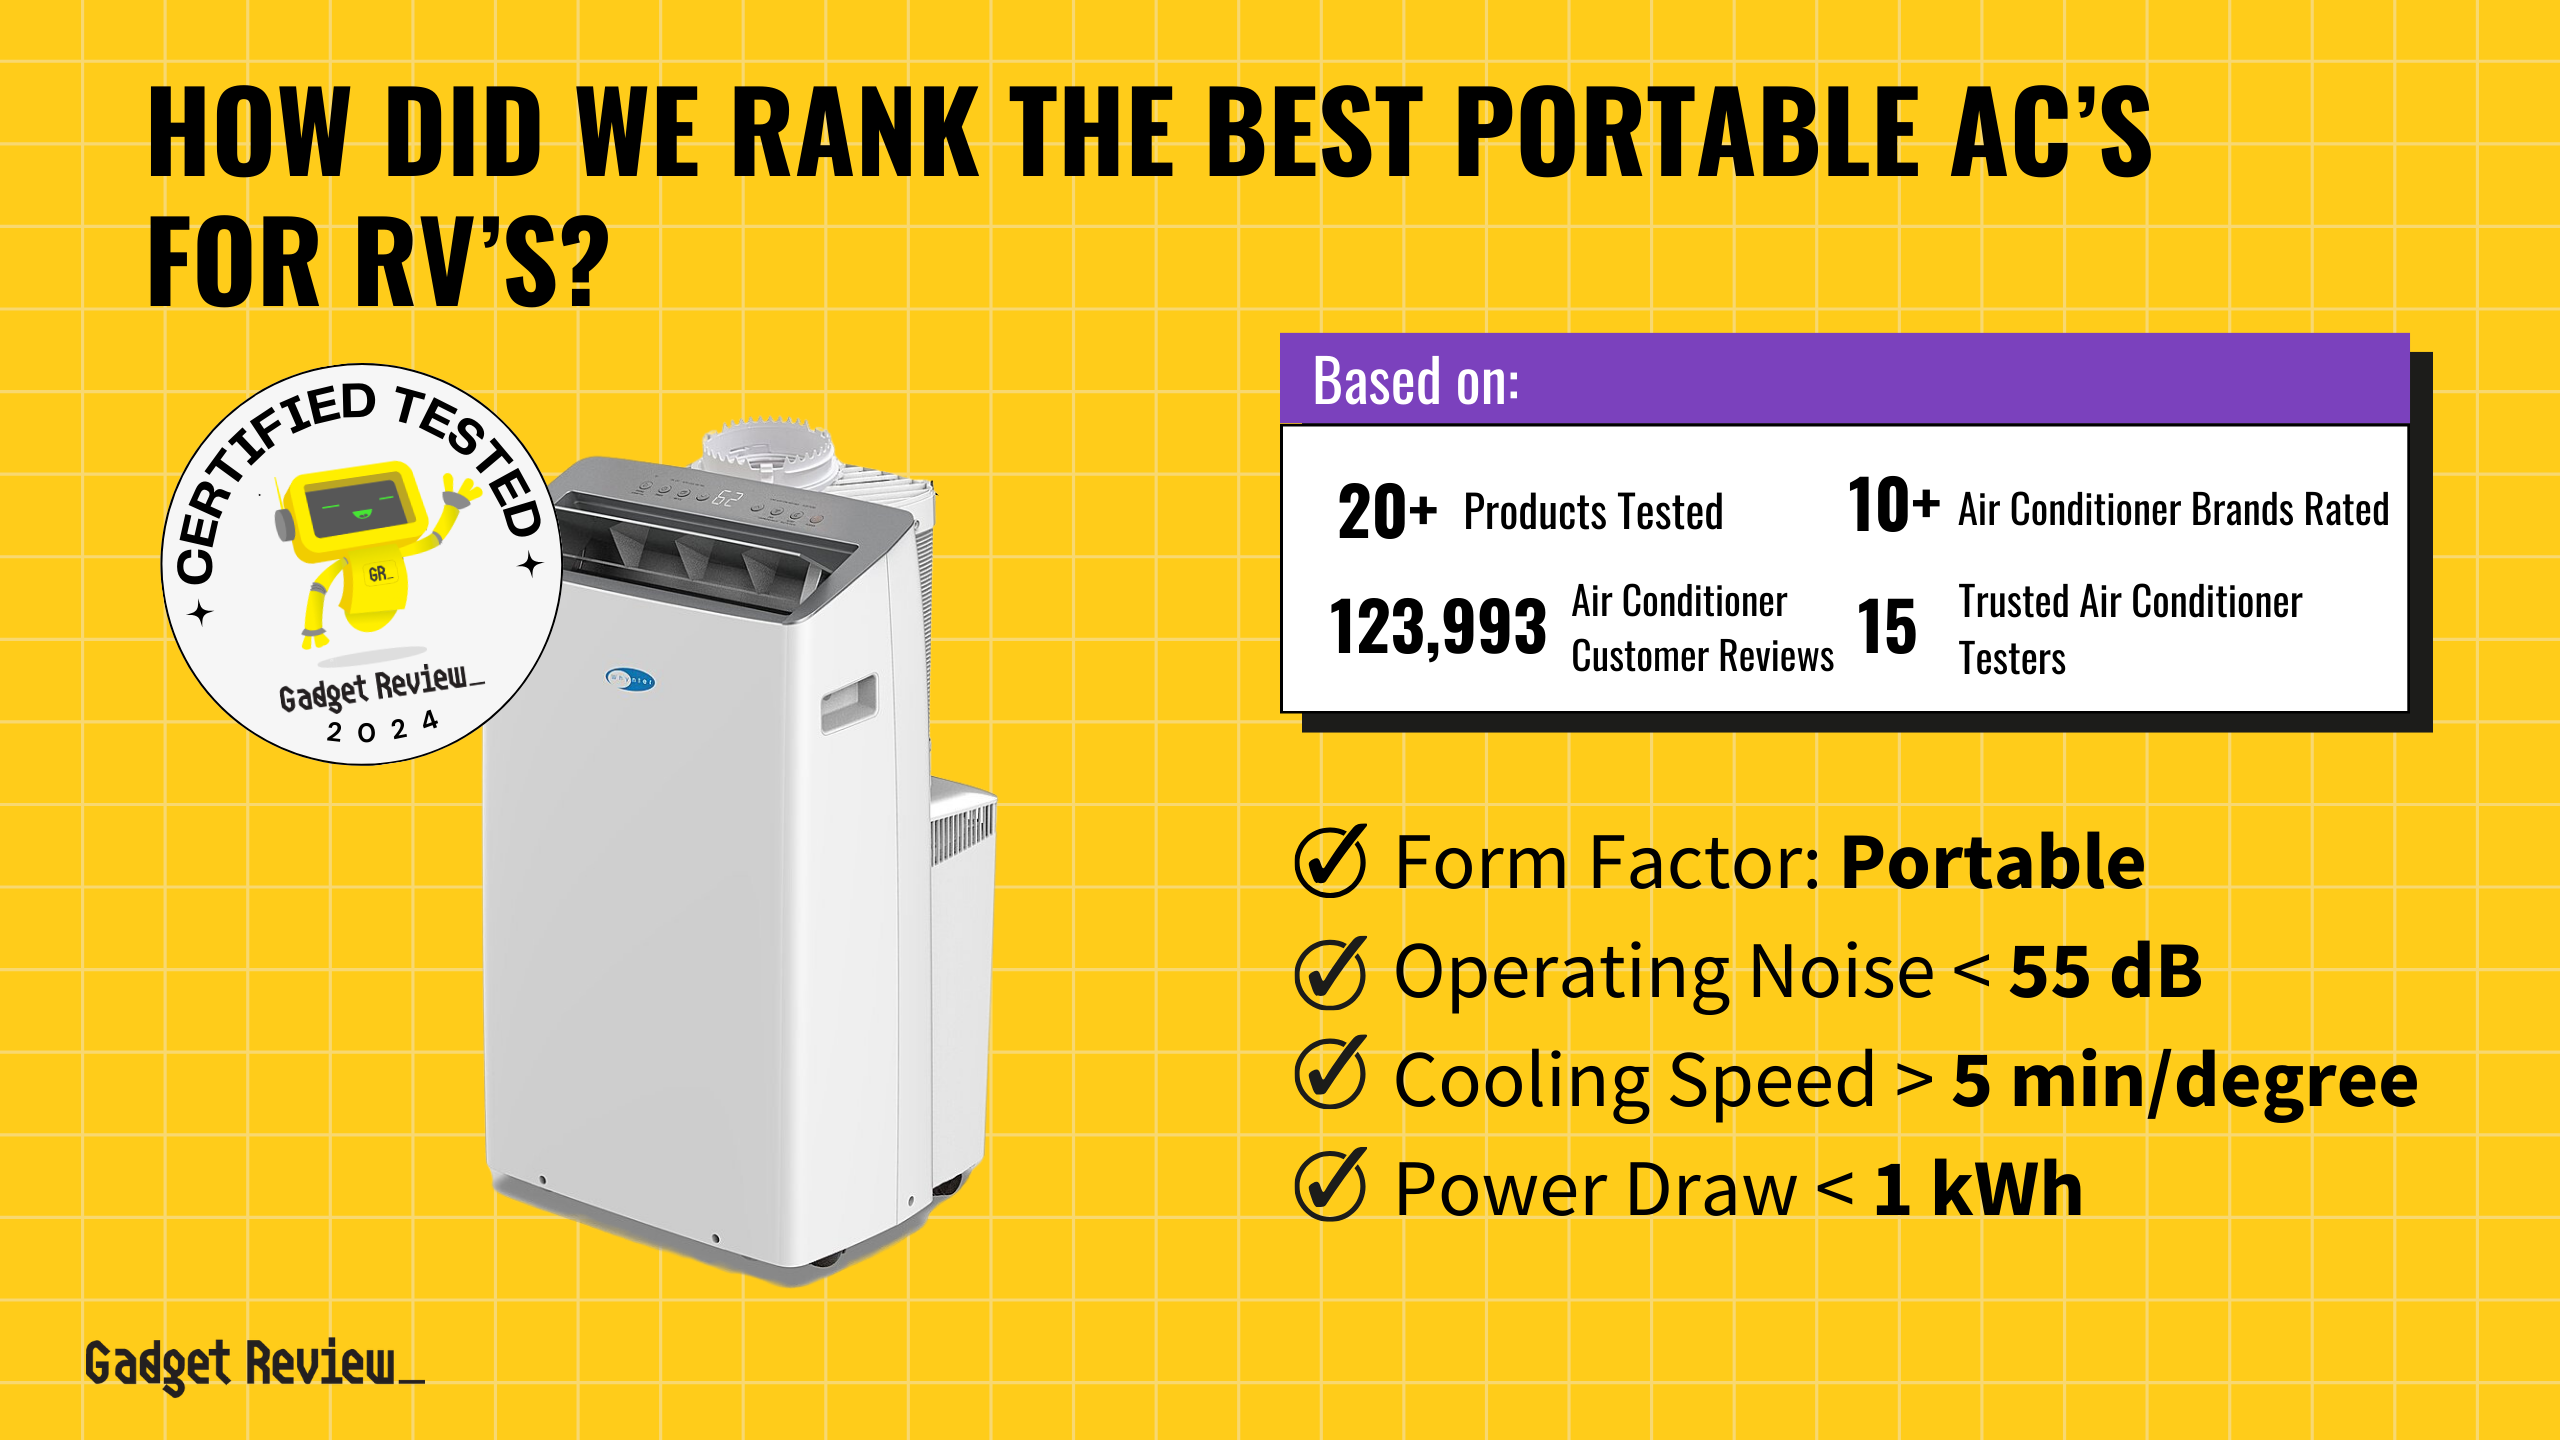 How We Ranked the 3 Best Portable Air Conditioners for RV